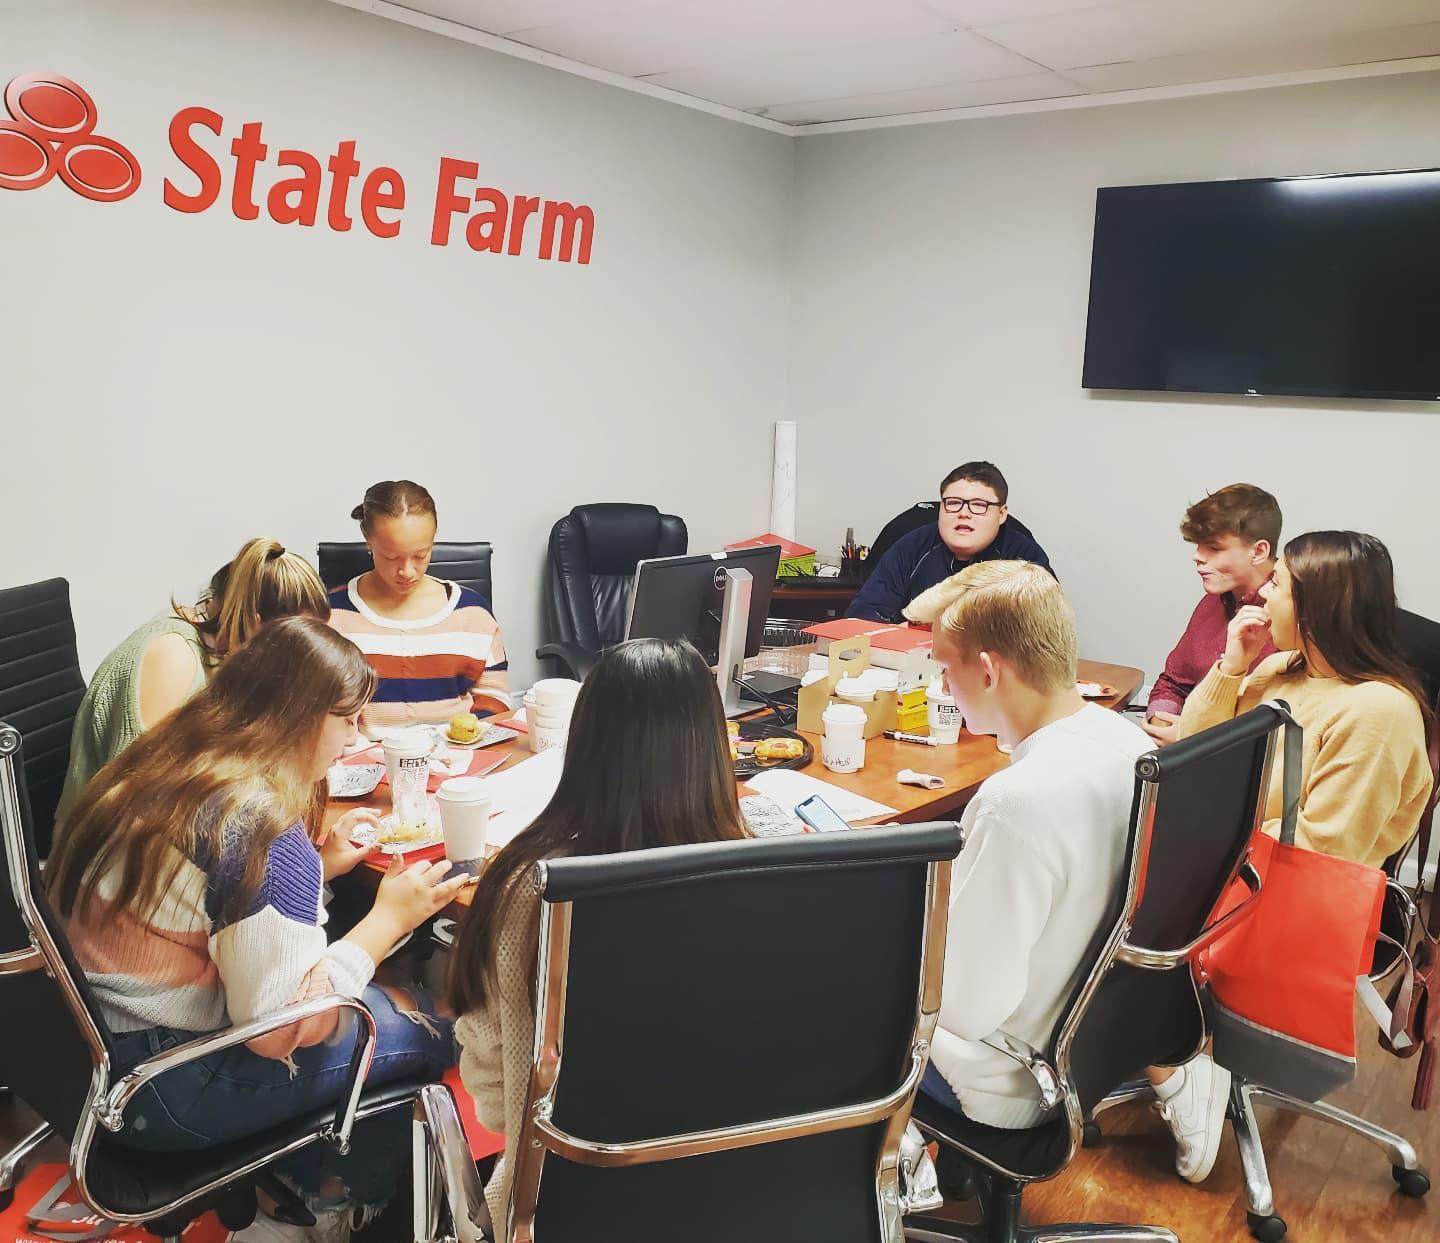 We are so excited for our high school internship program! Lauren Yohman - State Farm Insurance Agent Uniontown (724)592-6308